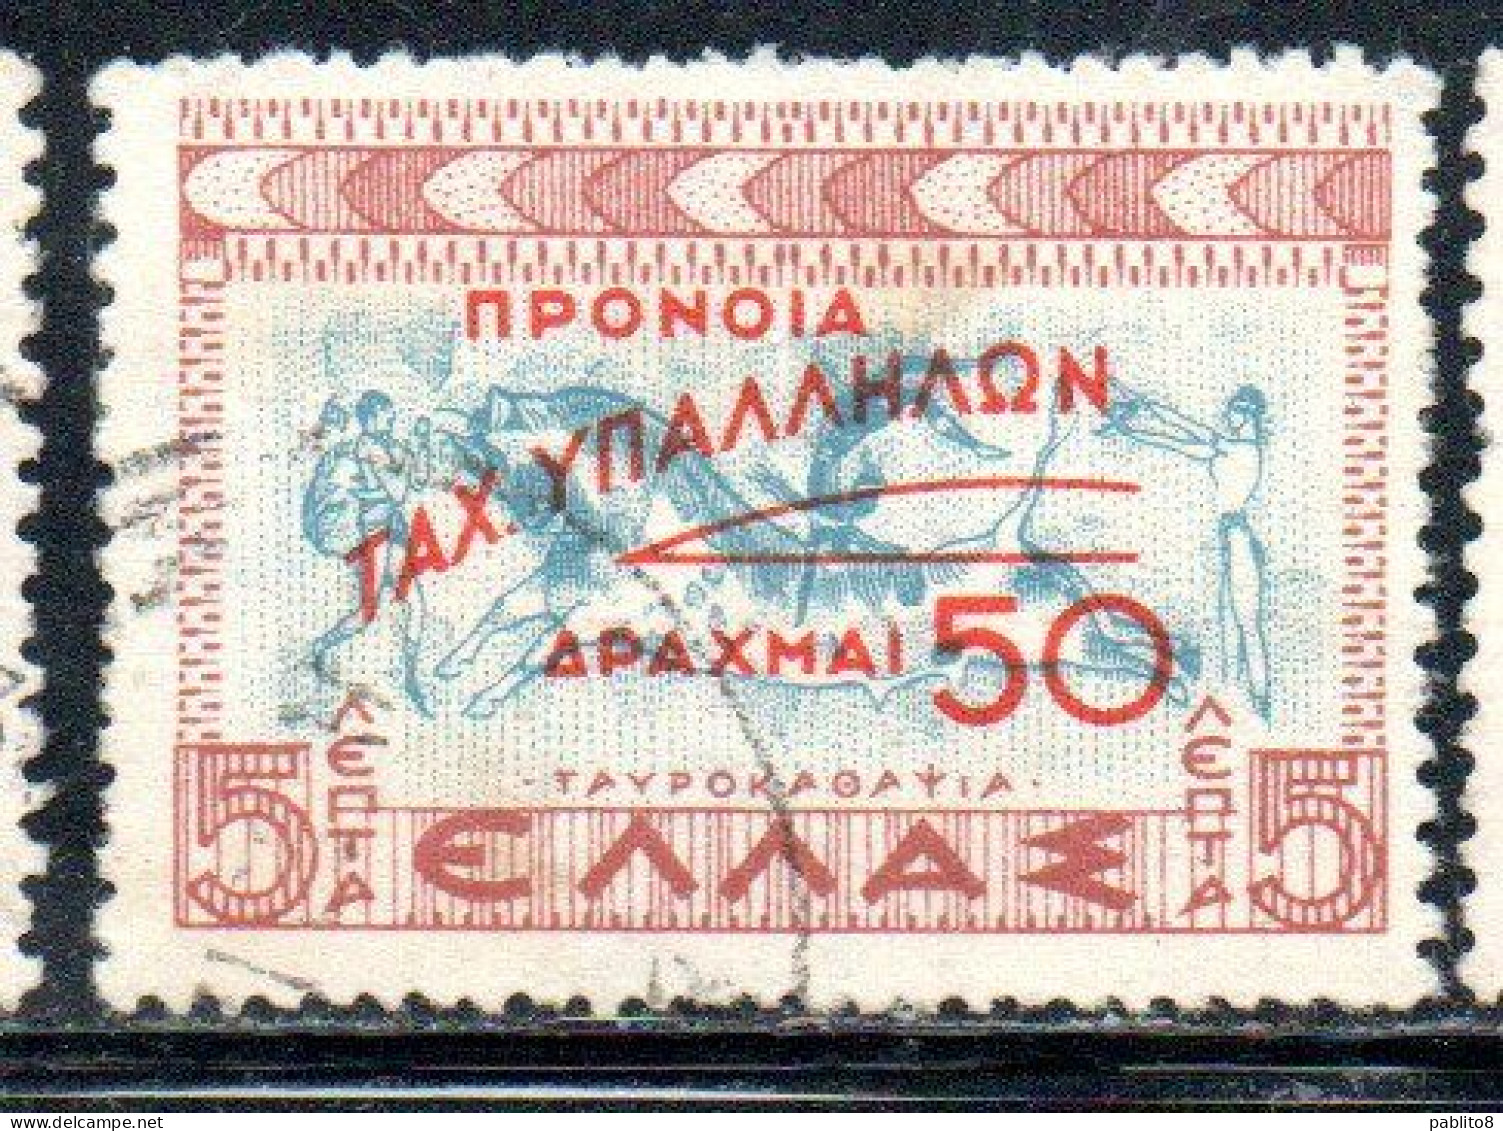 GREECE GRECIA ELLAS 1945 POSTAL TAX STAMPS WELFARE FUND SURCHARGED 50d On 5l USED USATO OBLITERE' - Revenue Stamps